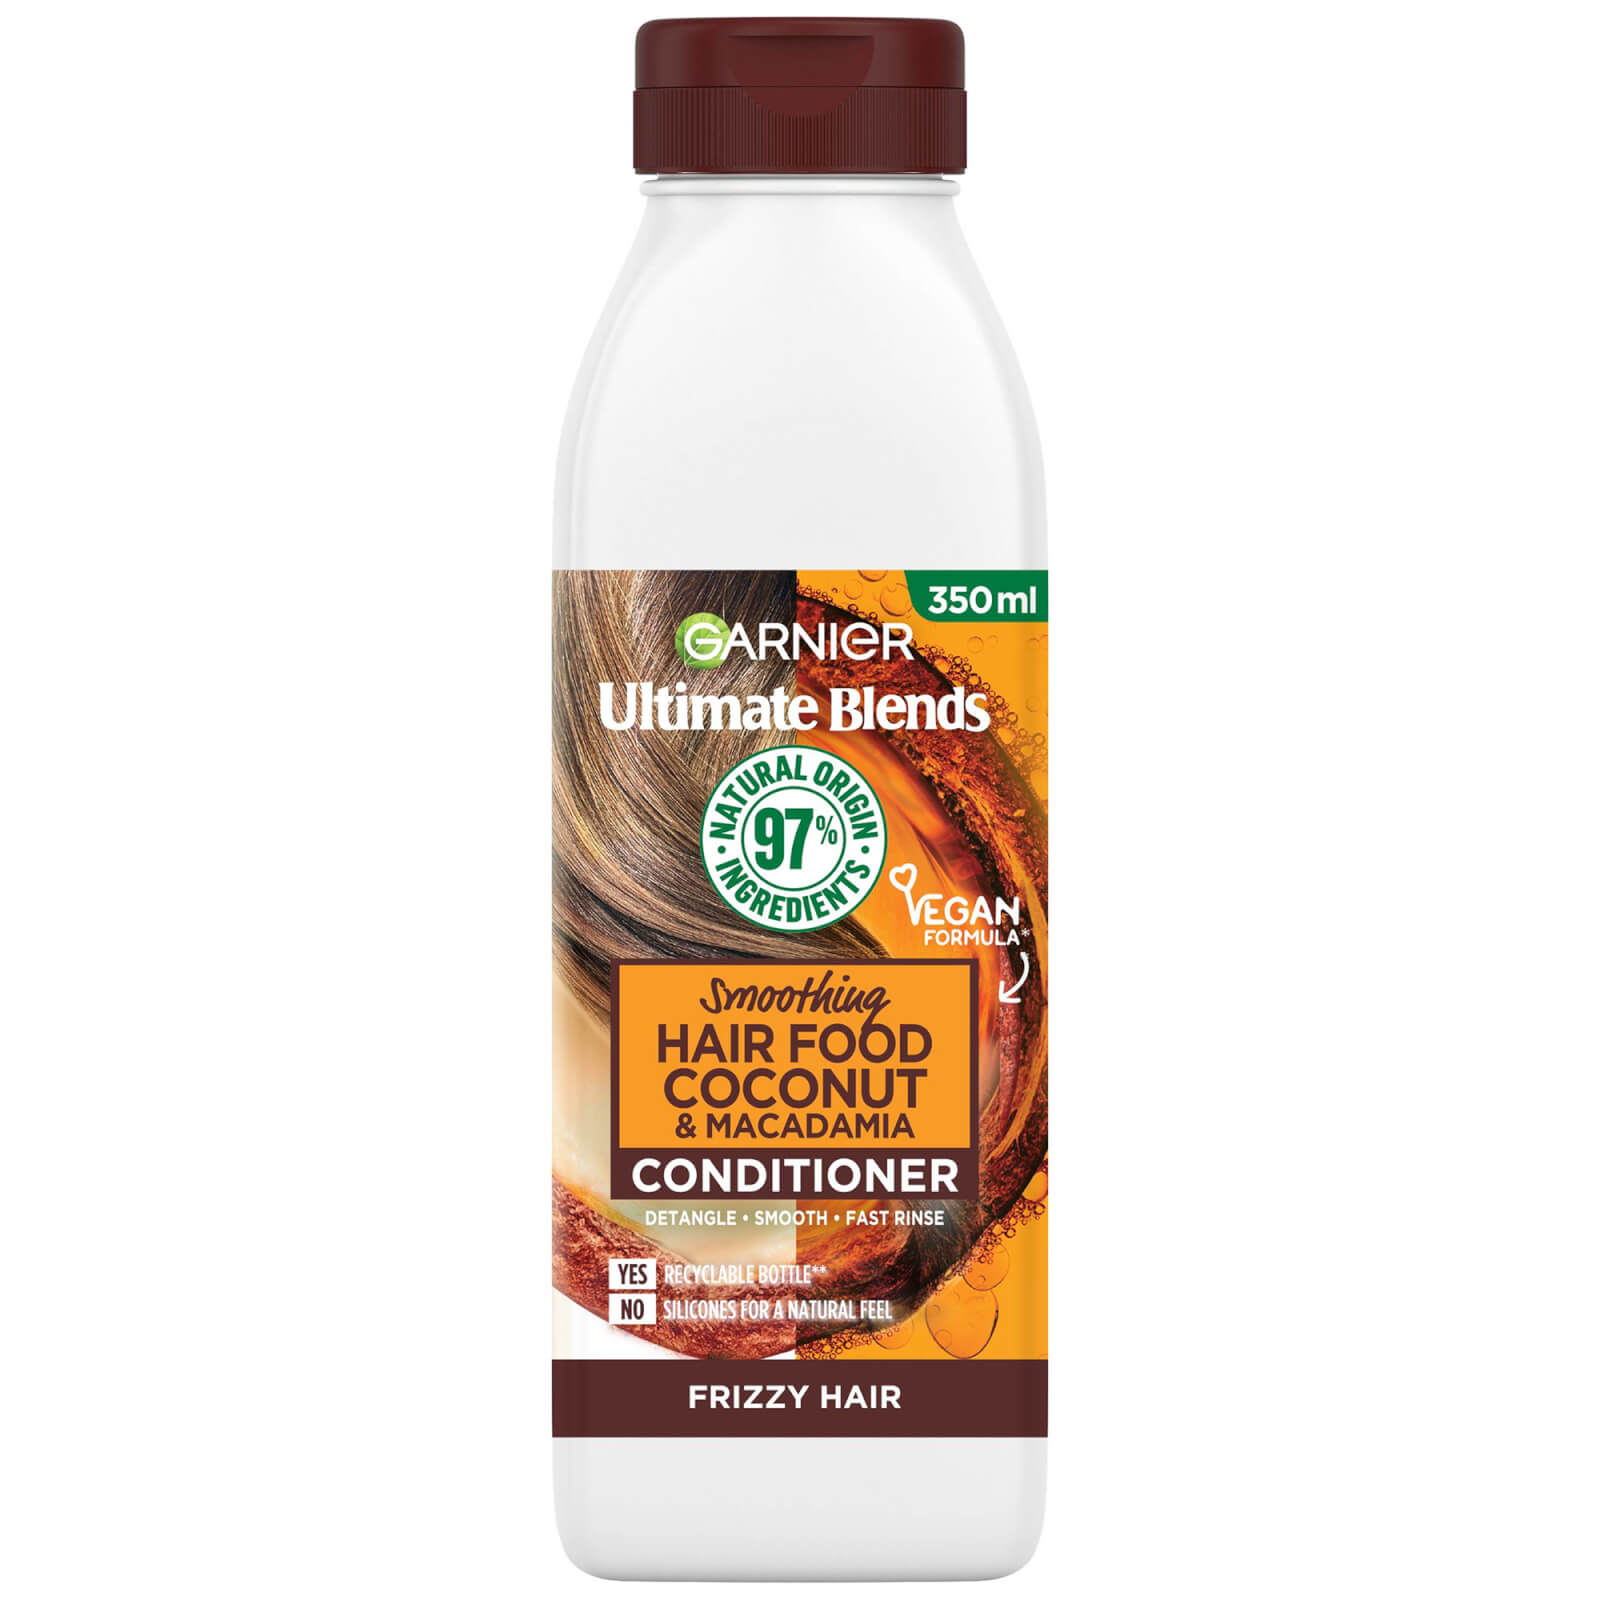 Garnier Ultimate Blends Smoothing Hair Food Coconut Conditioner for Frizzy Hair 350ml product